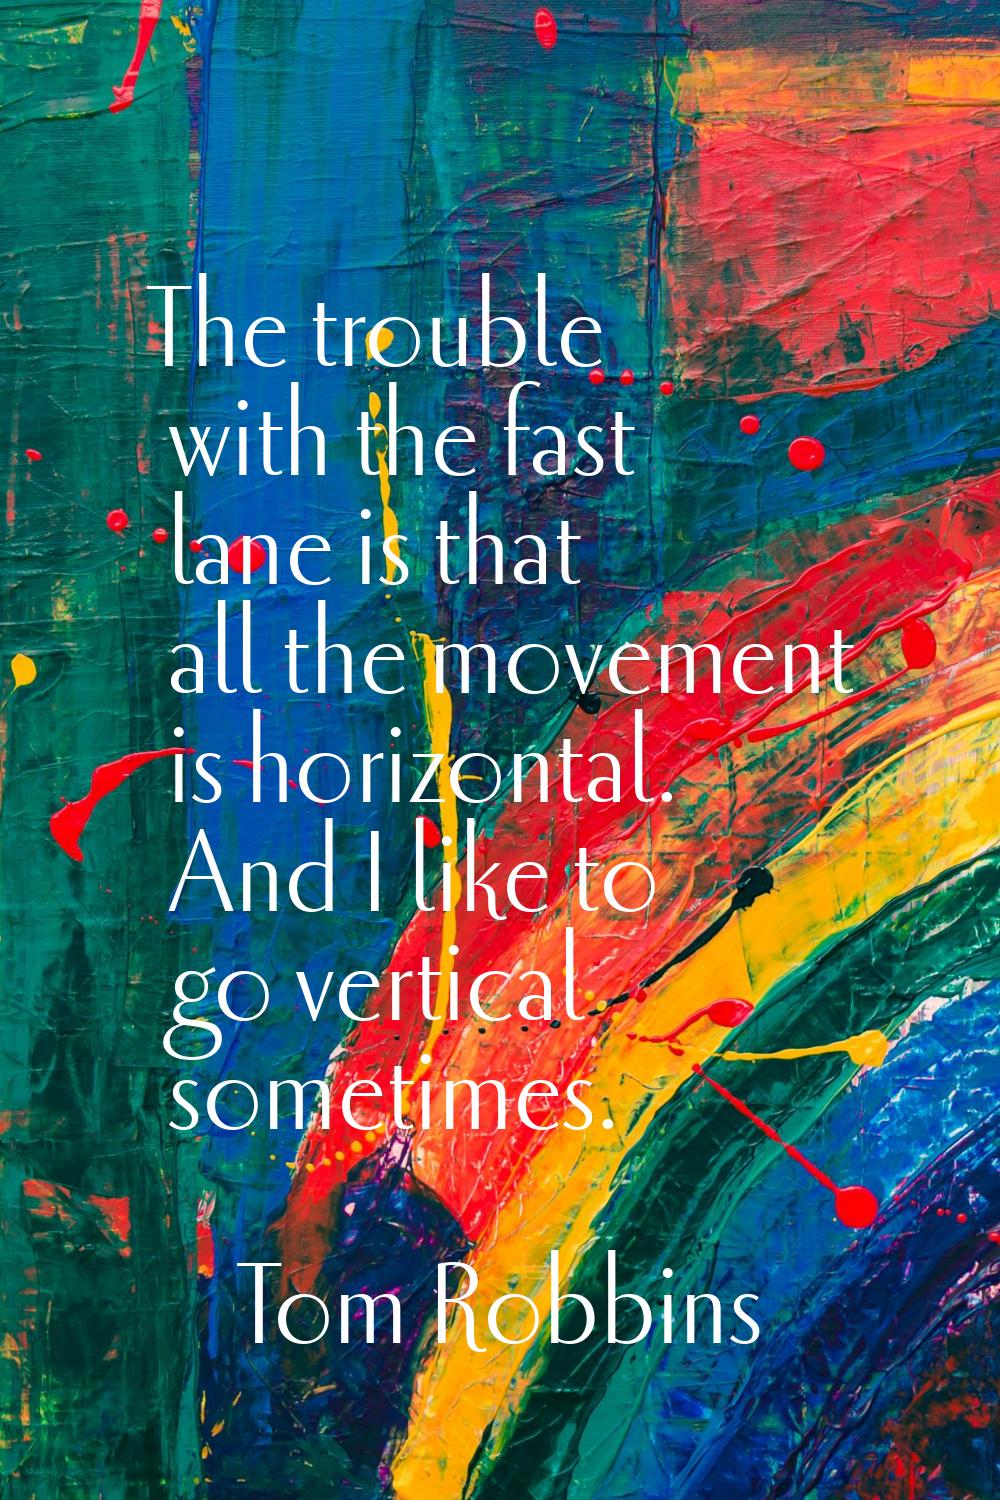 The trouble with the fast lane is that all the movement is horizontal. And I like to go vertical so